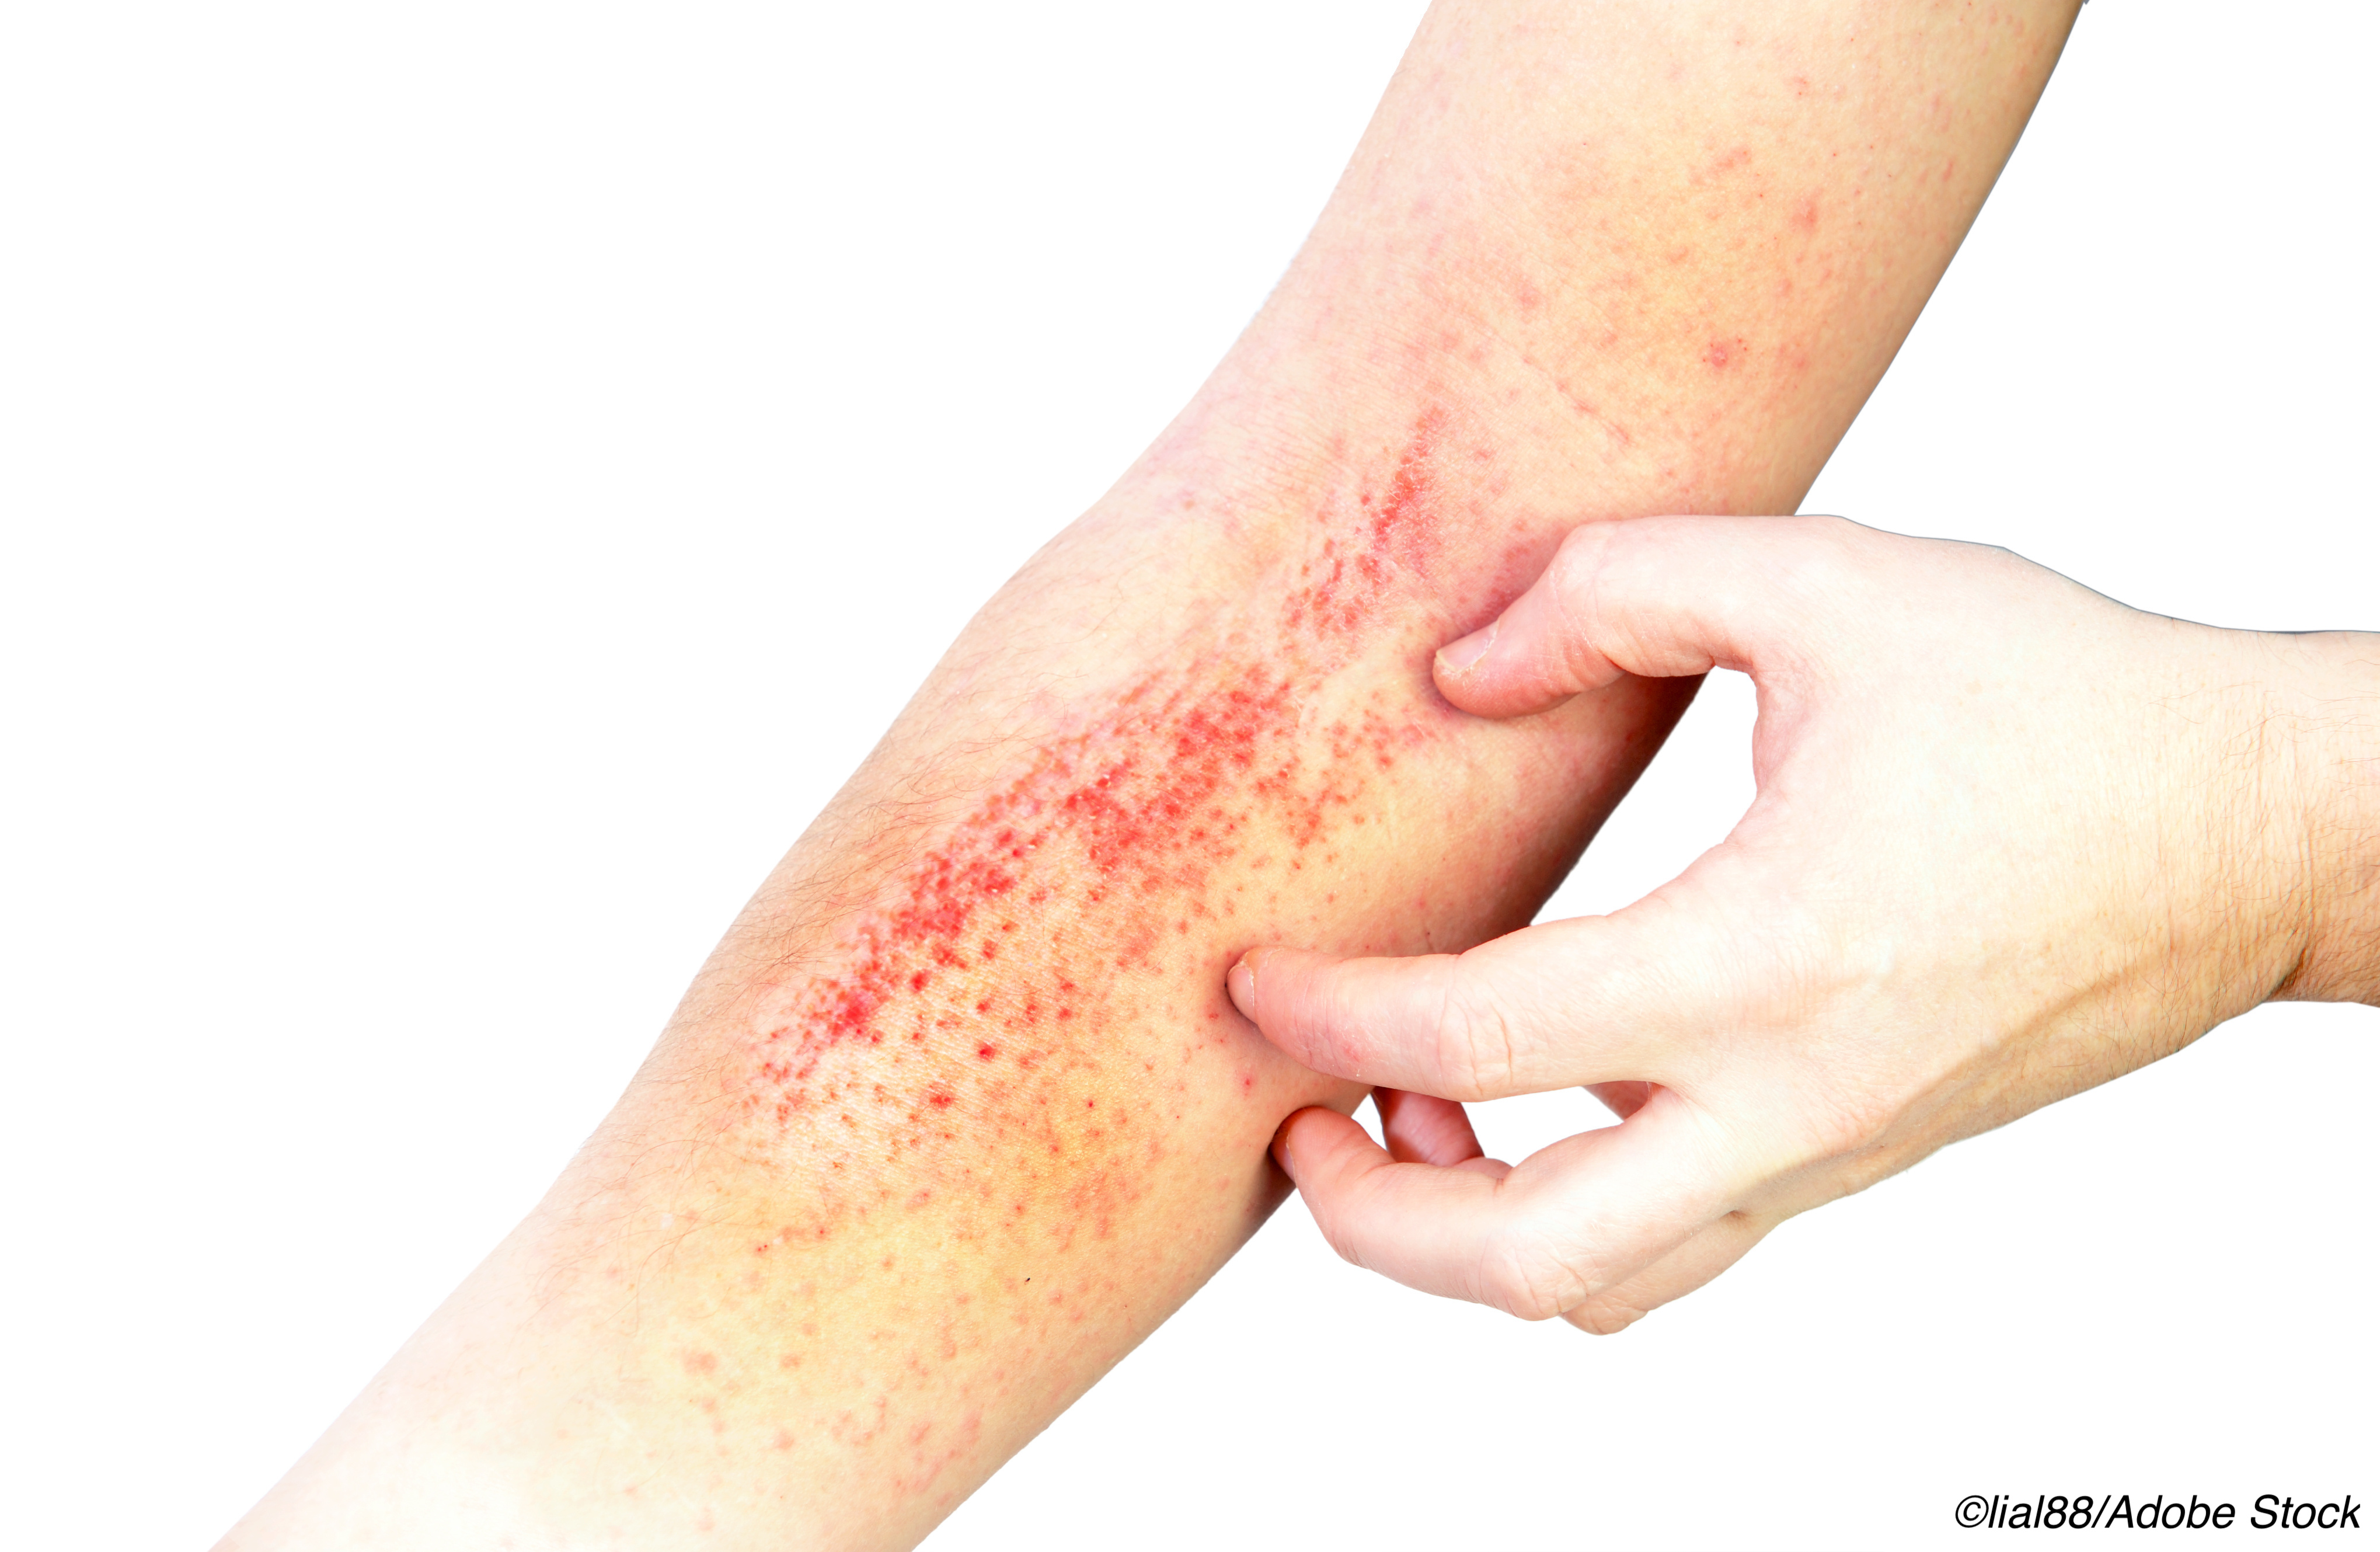 JAK Inhibitor Safe, Effective for Treatment of Moderate-to-Severe Atopic Dermatitis